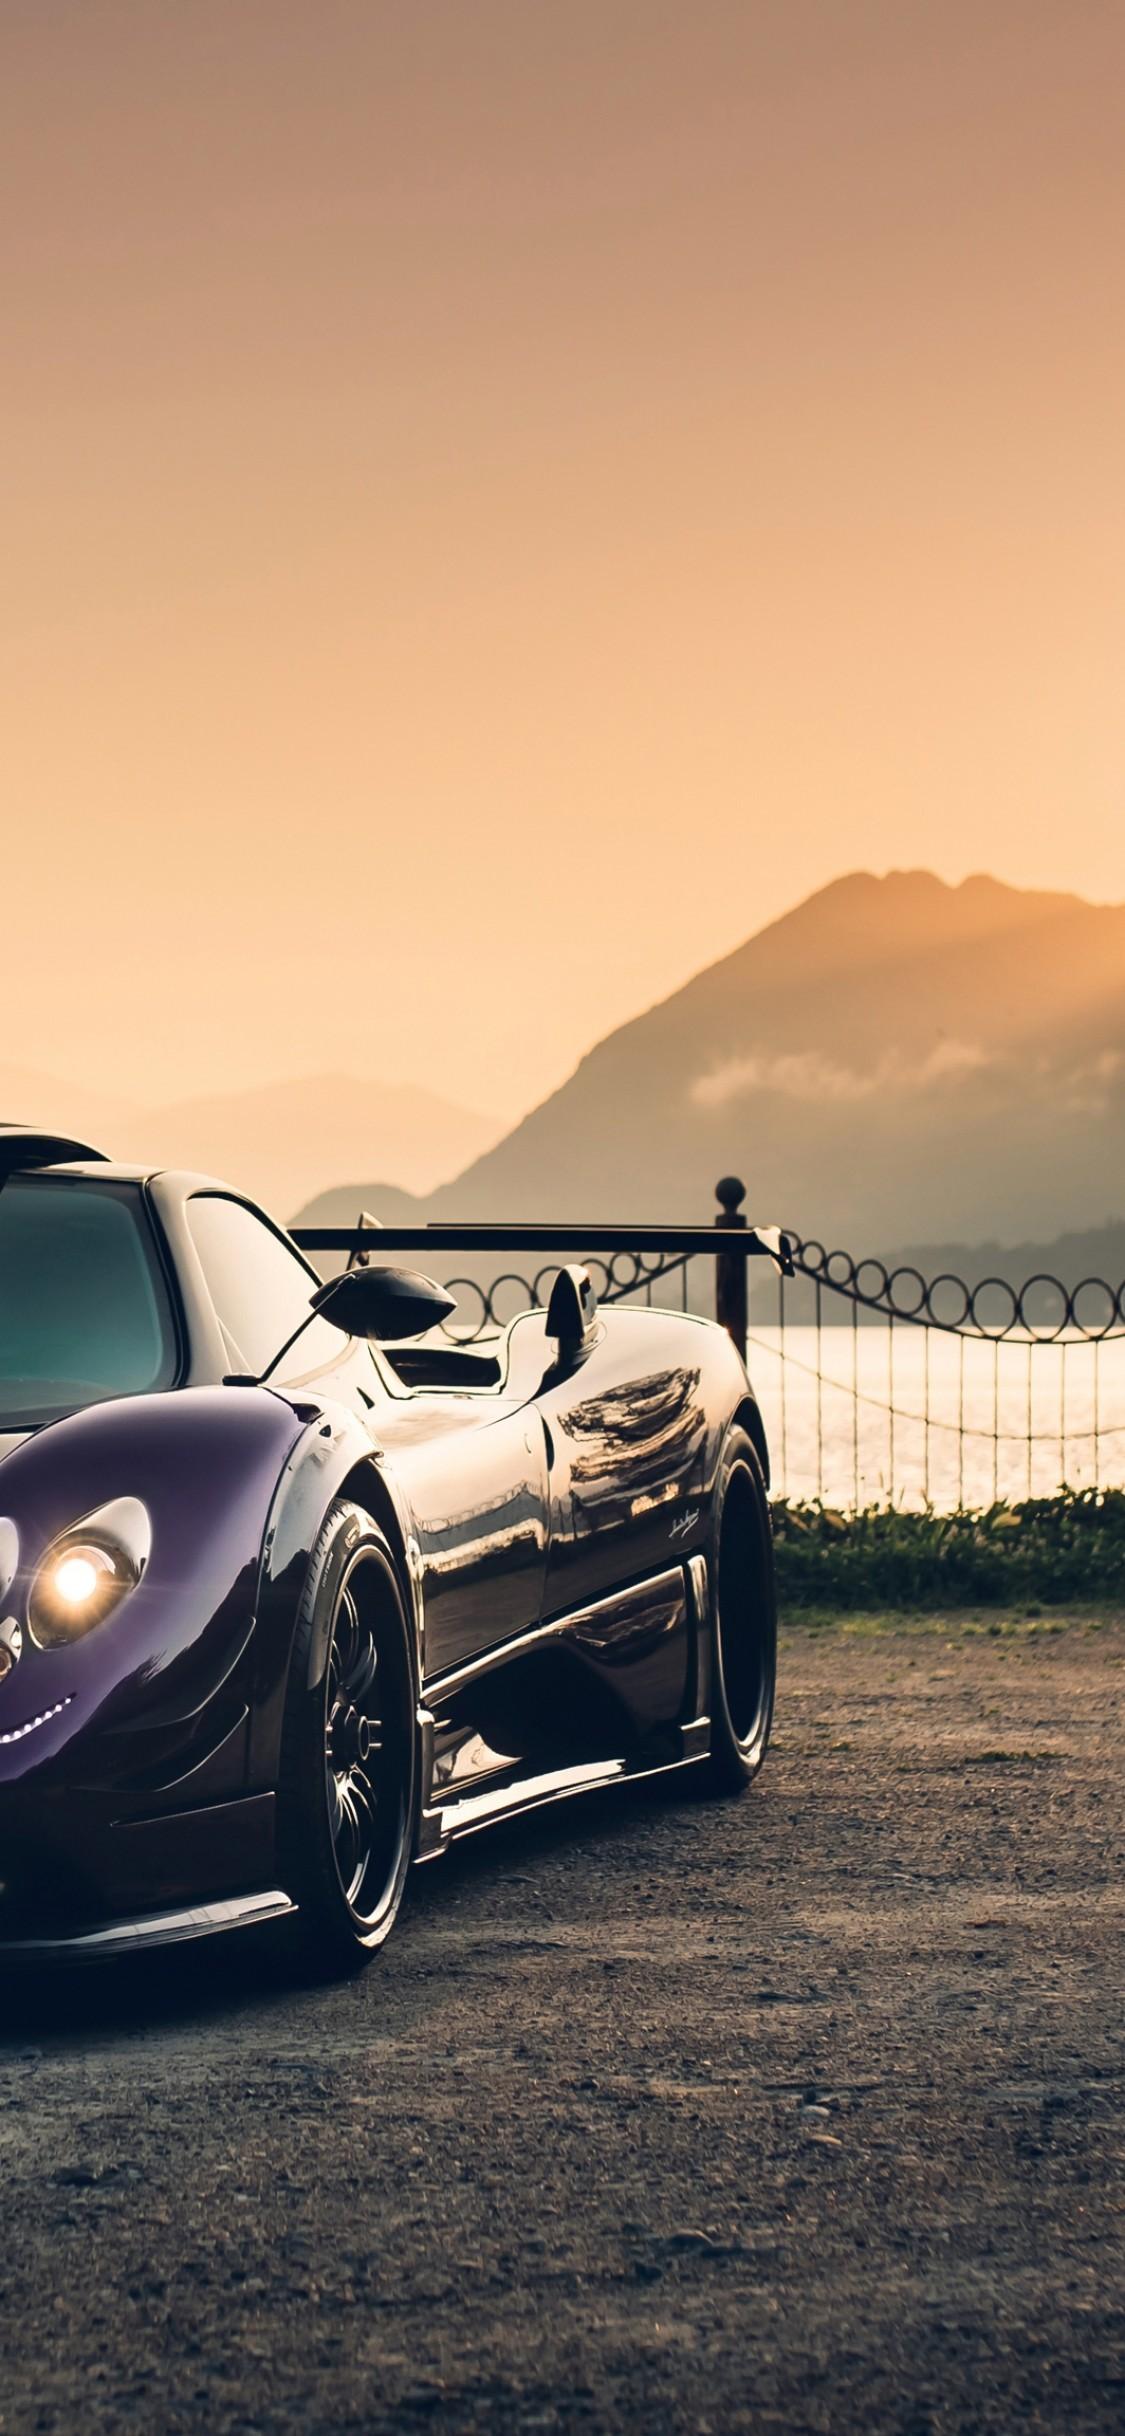 Download 1125x2436 Pagani Zonda Aether, Sunset, Supercars